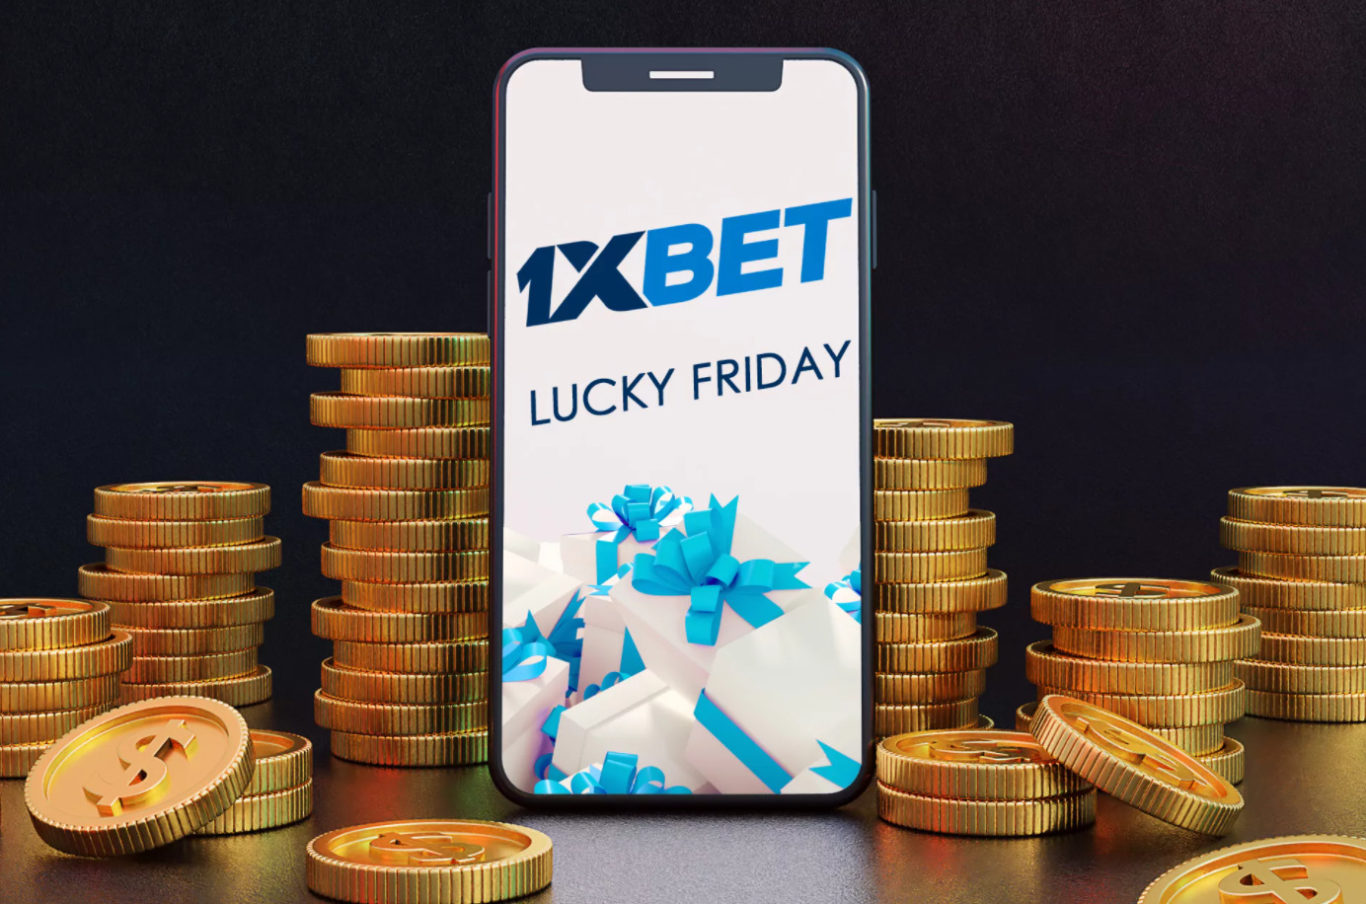 1xBet Friday Bonus Terms and Conditions